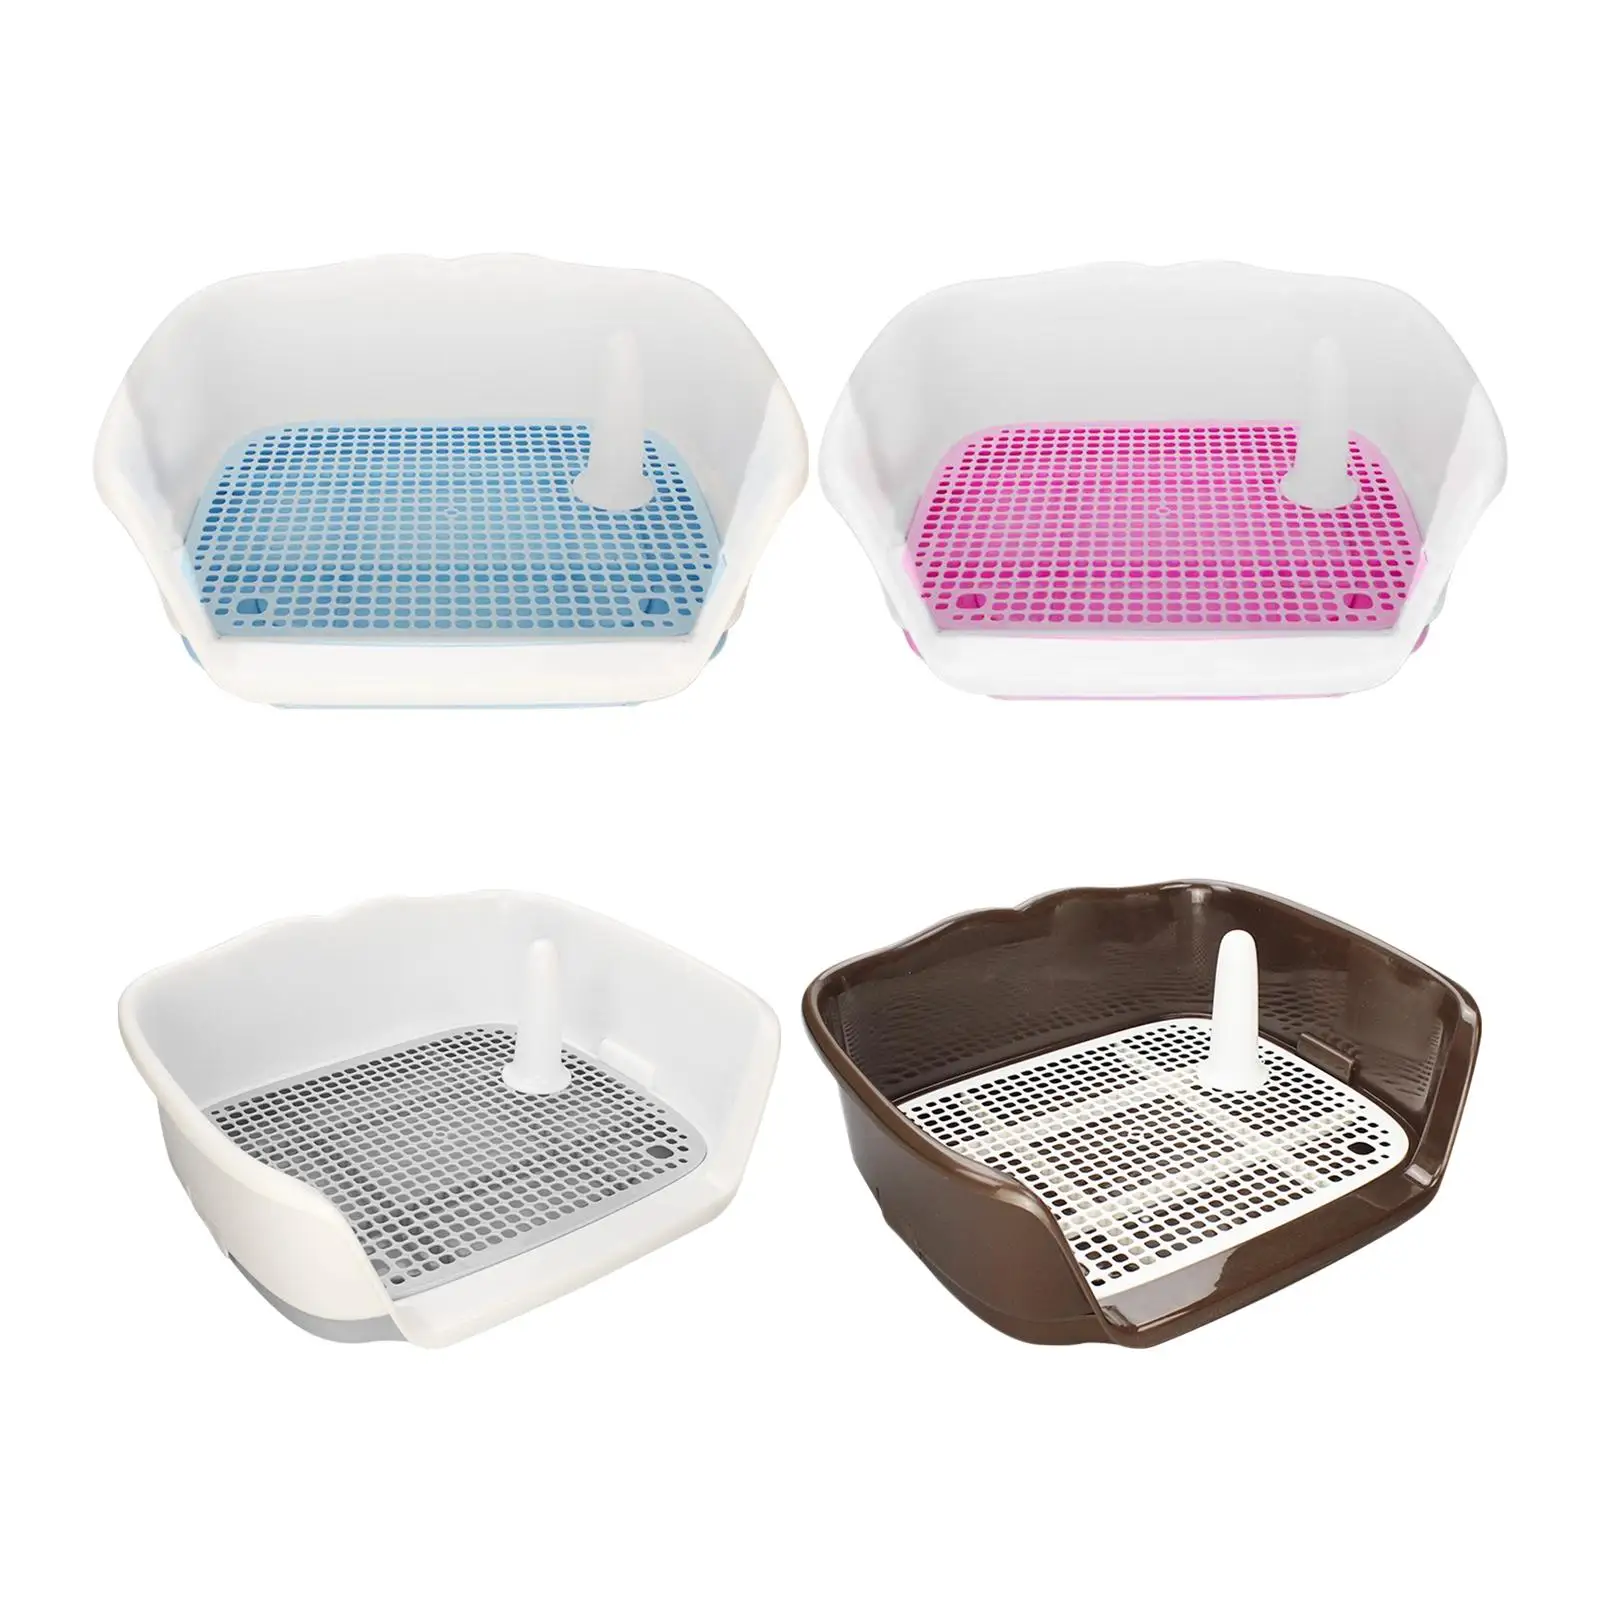 Indoor Dog Potty Tray Small Dog Urinal with Protection Wall Every Side Litter Box with Removable Post Keep Floors Clean Toilet